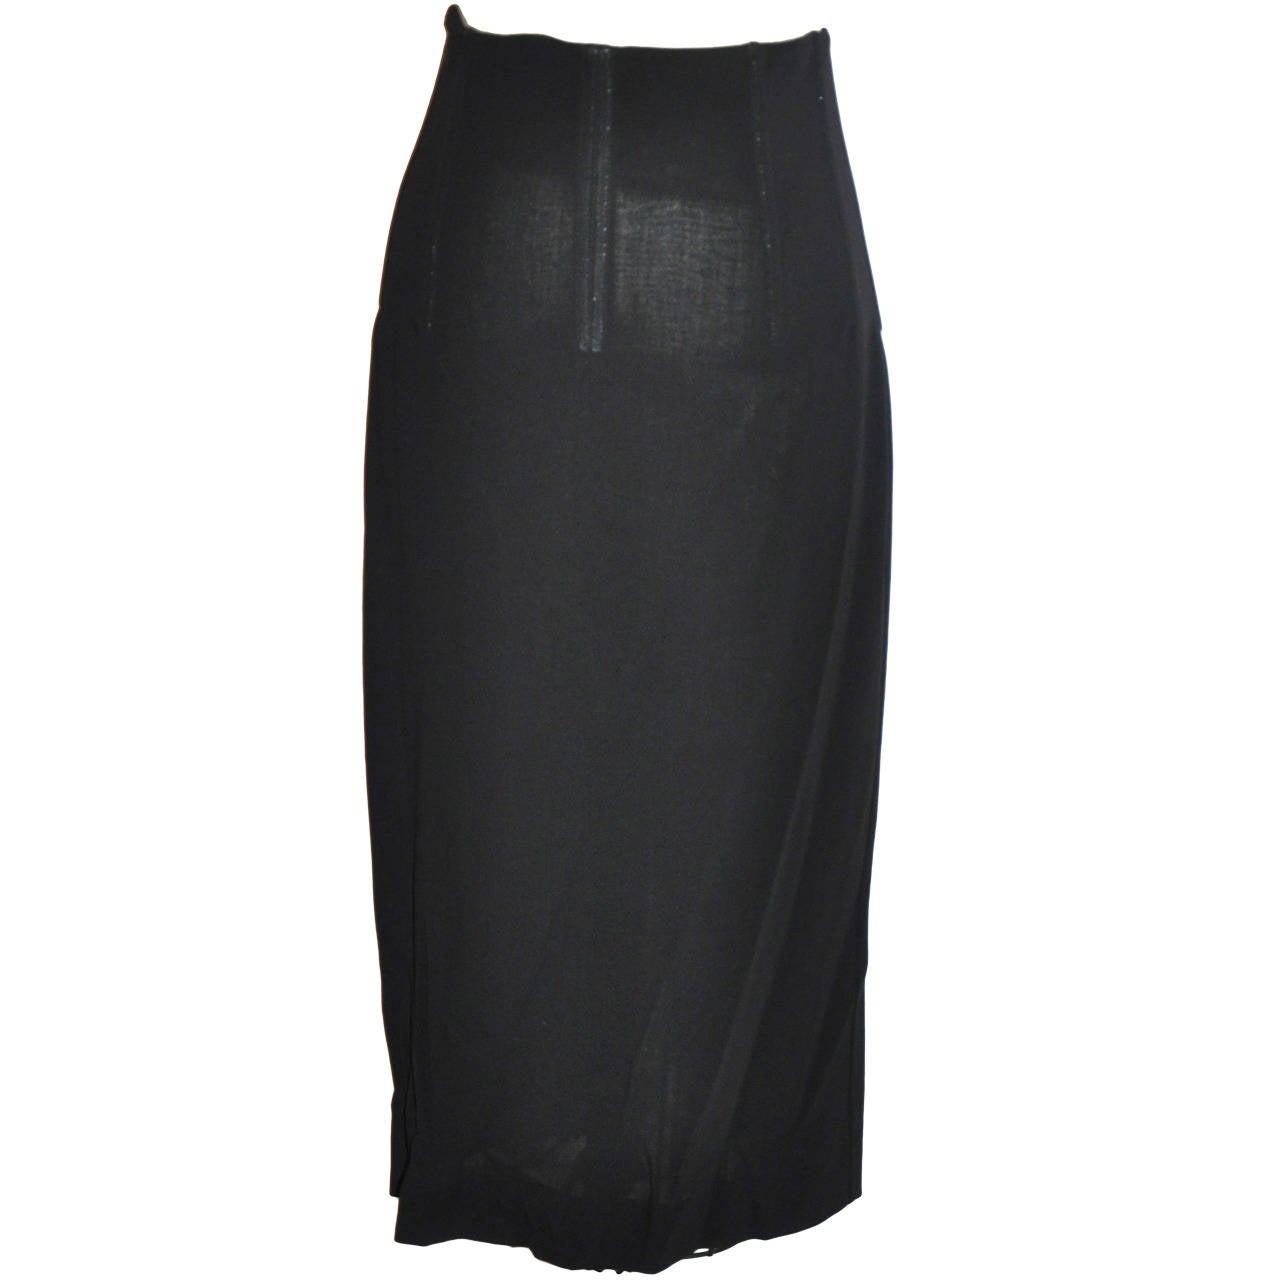 Dolce and Gabbana Form-Fitting Black Skirt with Boning For Sale at 1stdibs